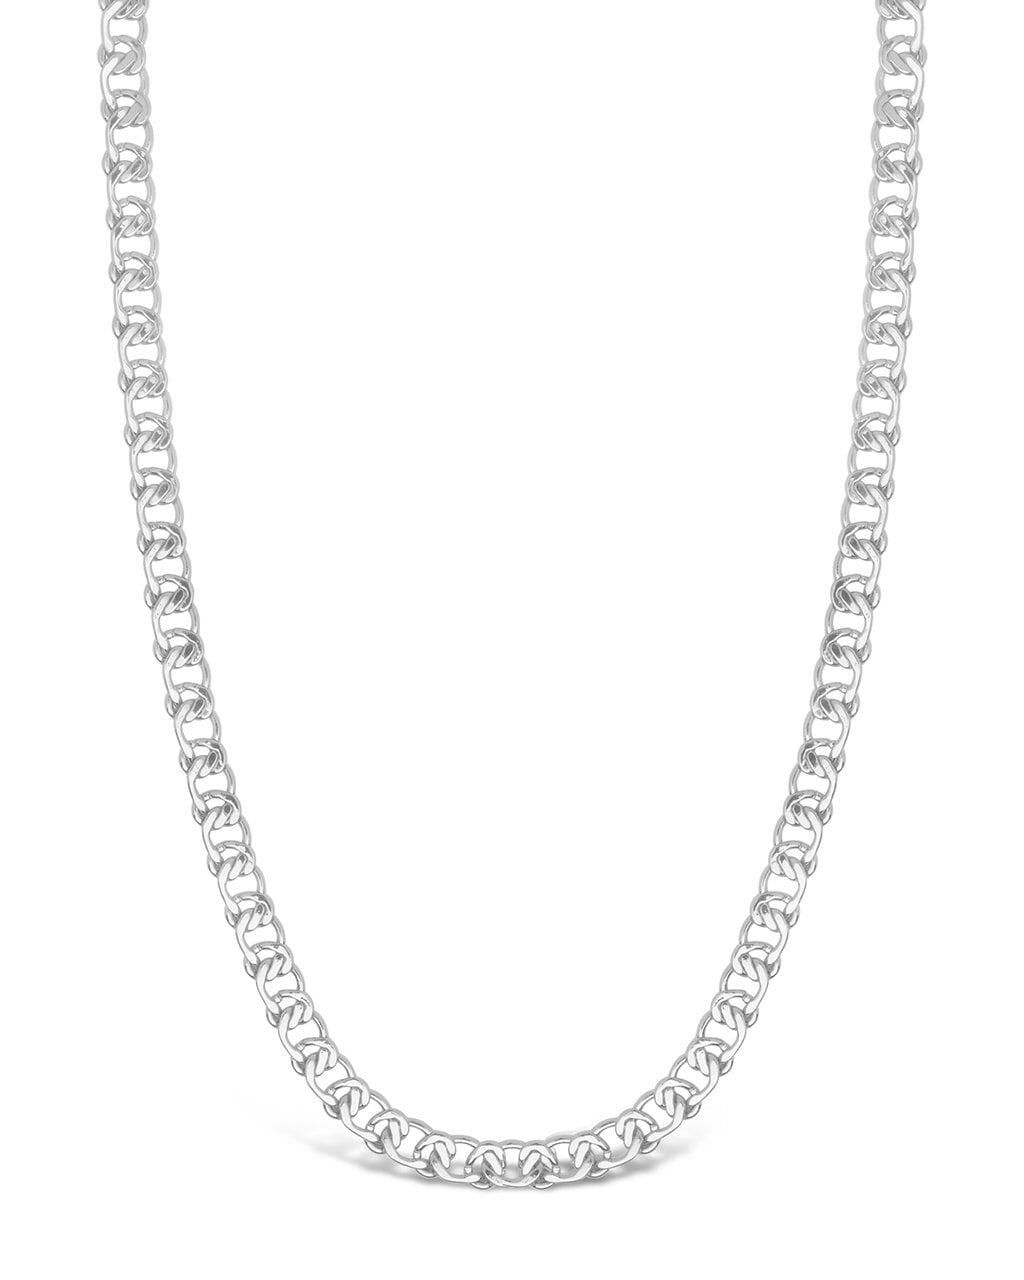 Men's Interlocking Curb Chain Necklace Necklace Sterling Forever Silver 